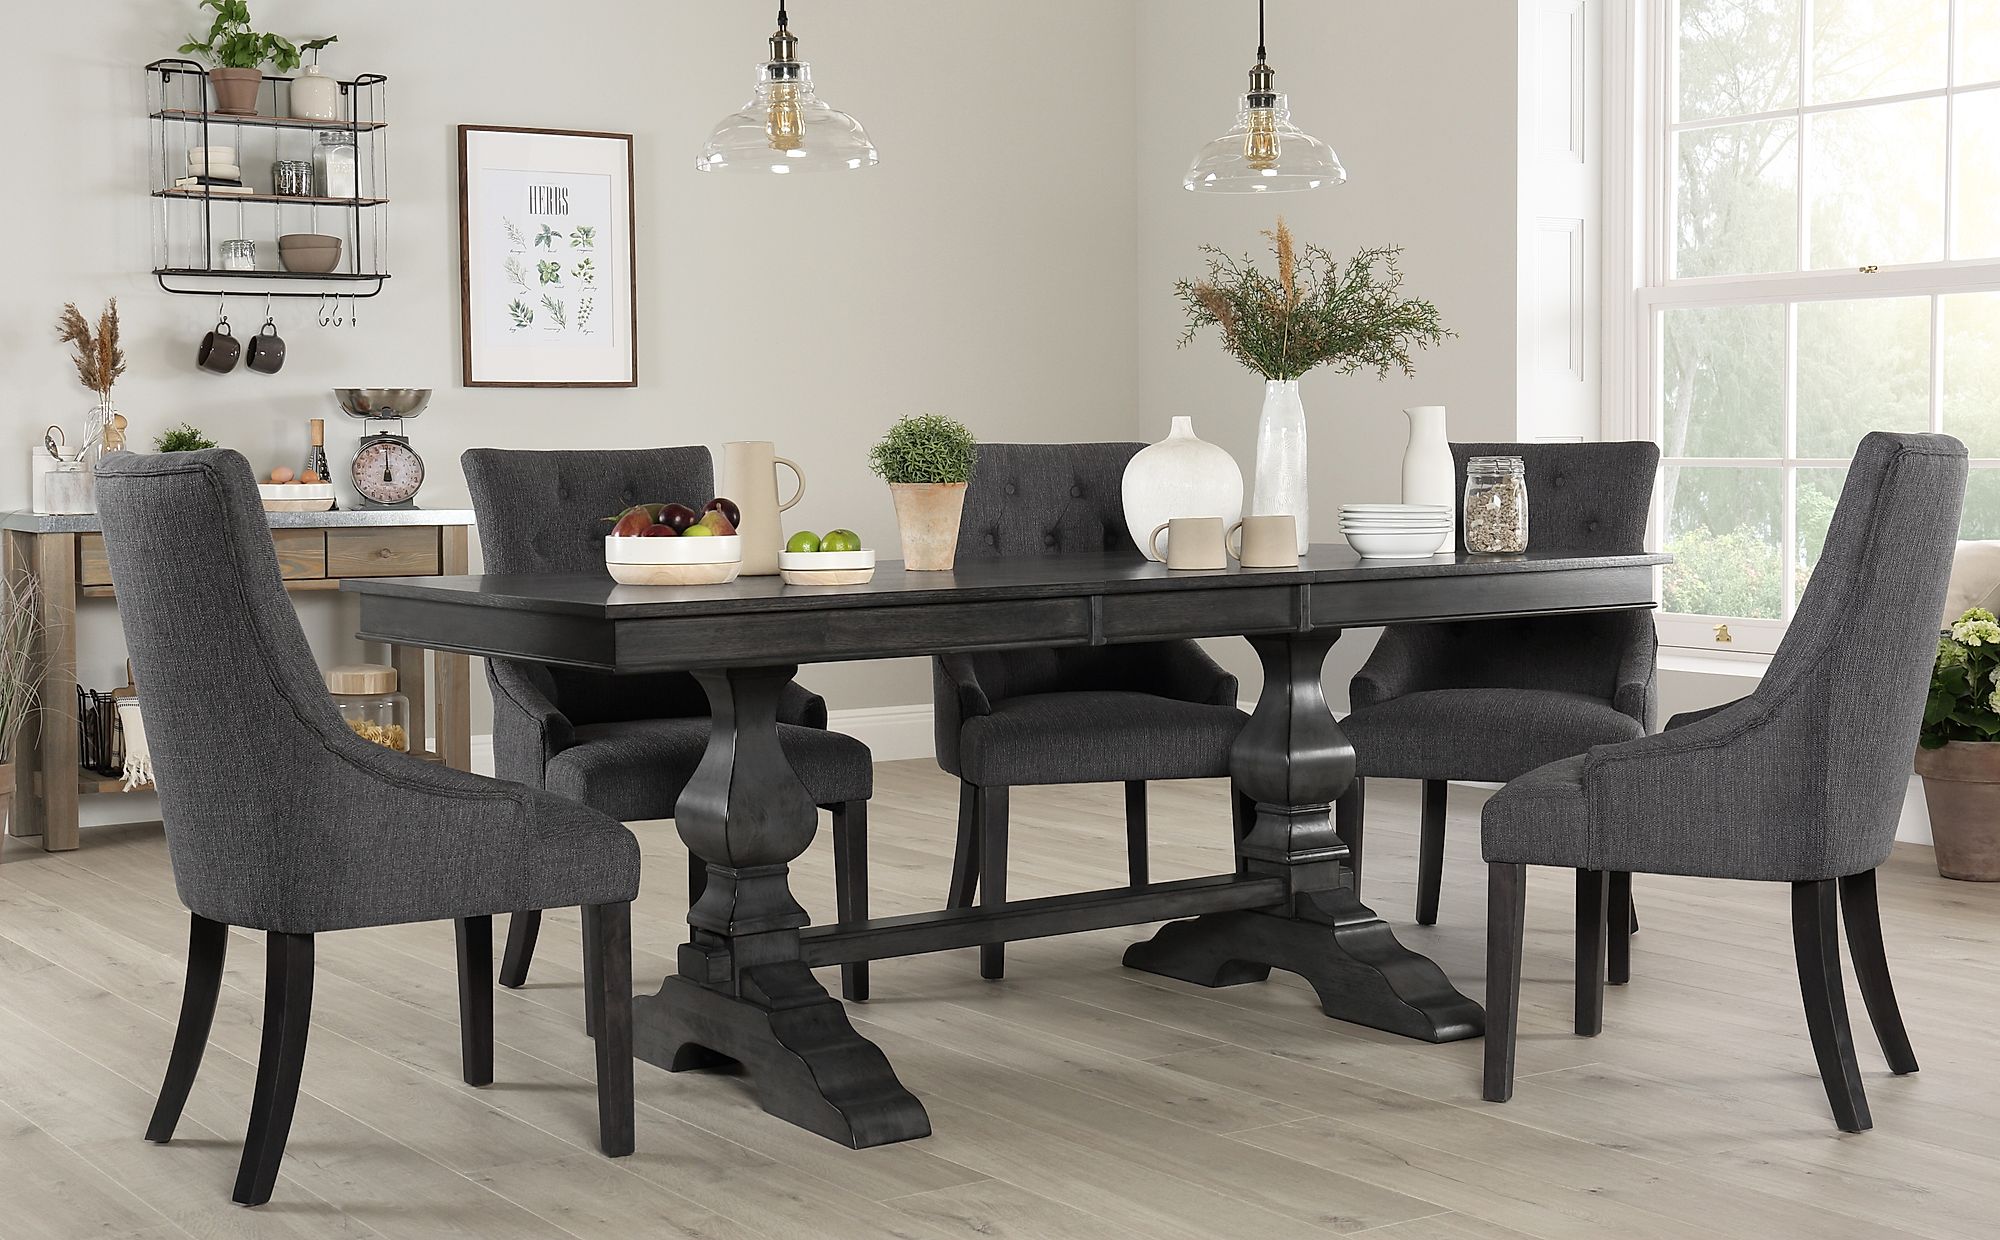 Gray Wash Wood Dining Room Table And Chairs